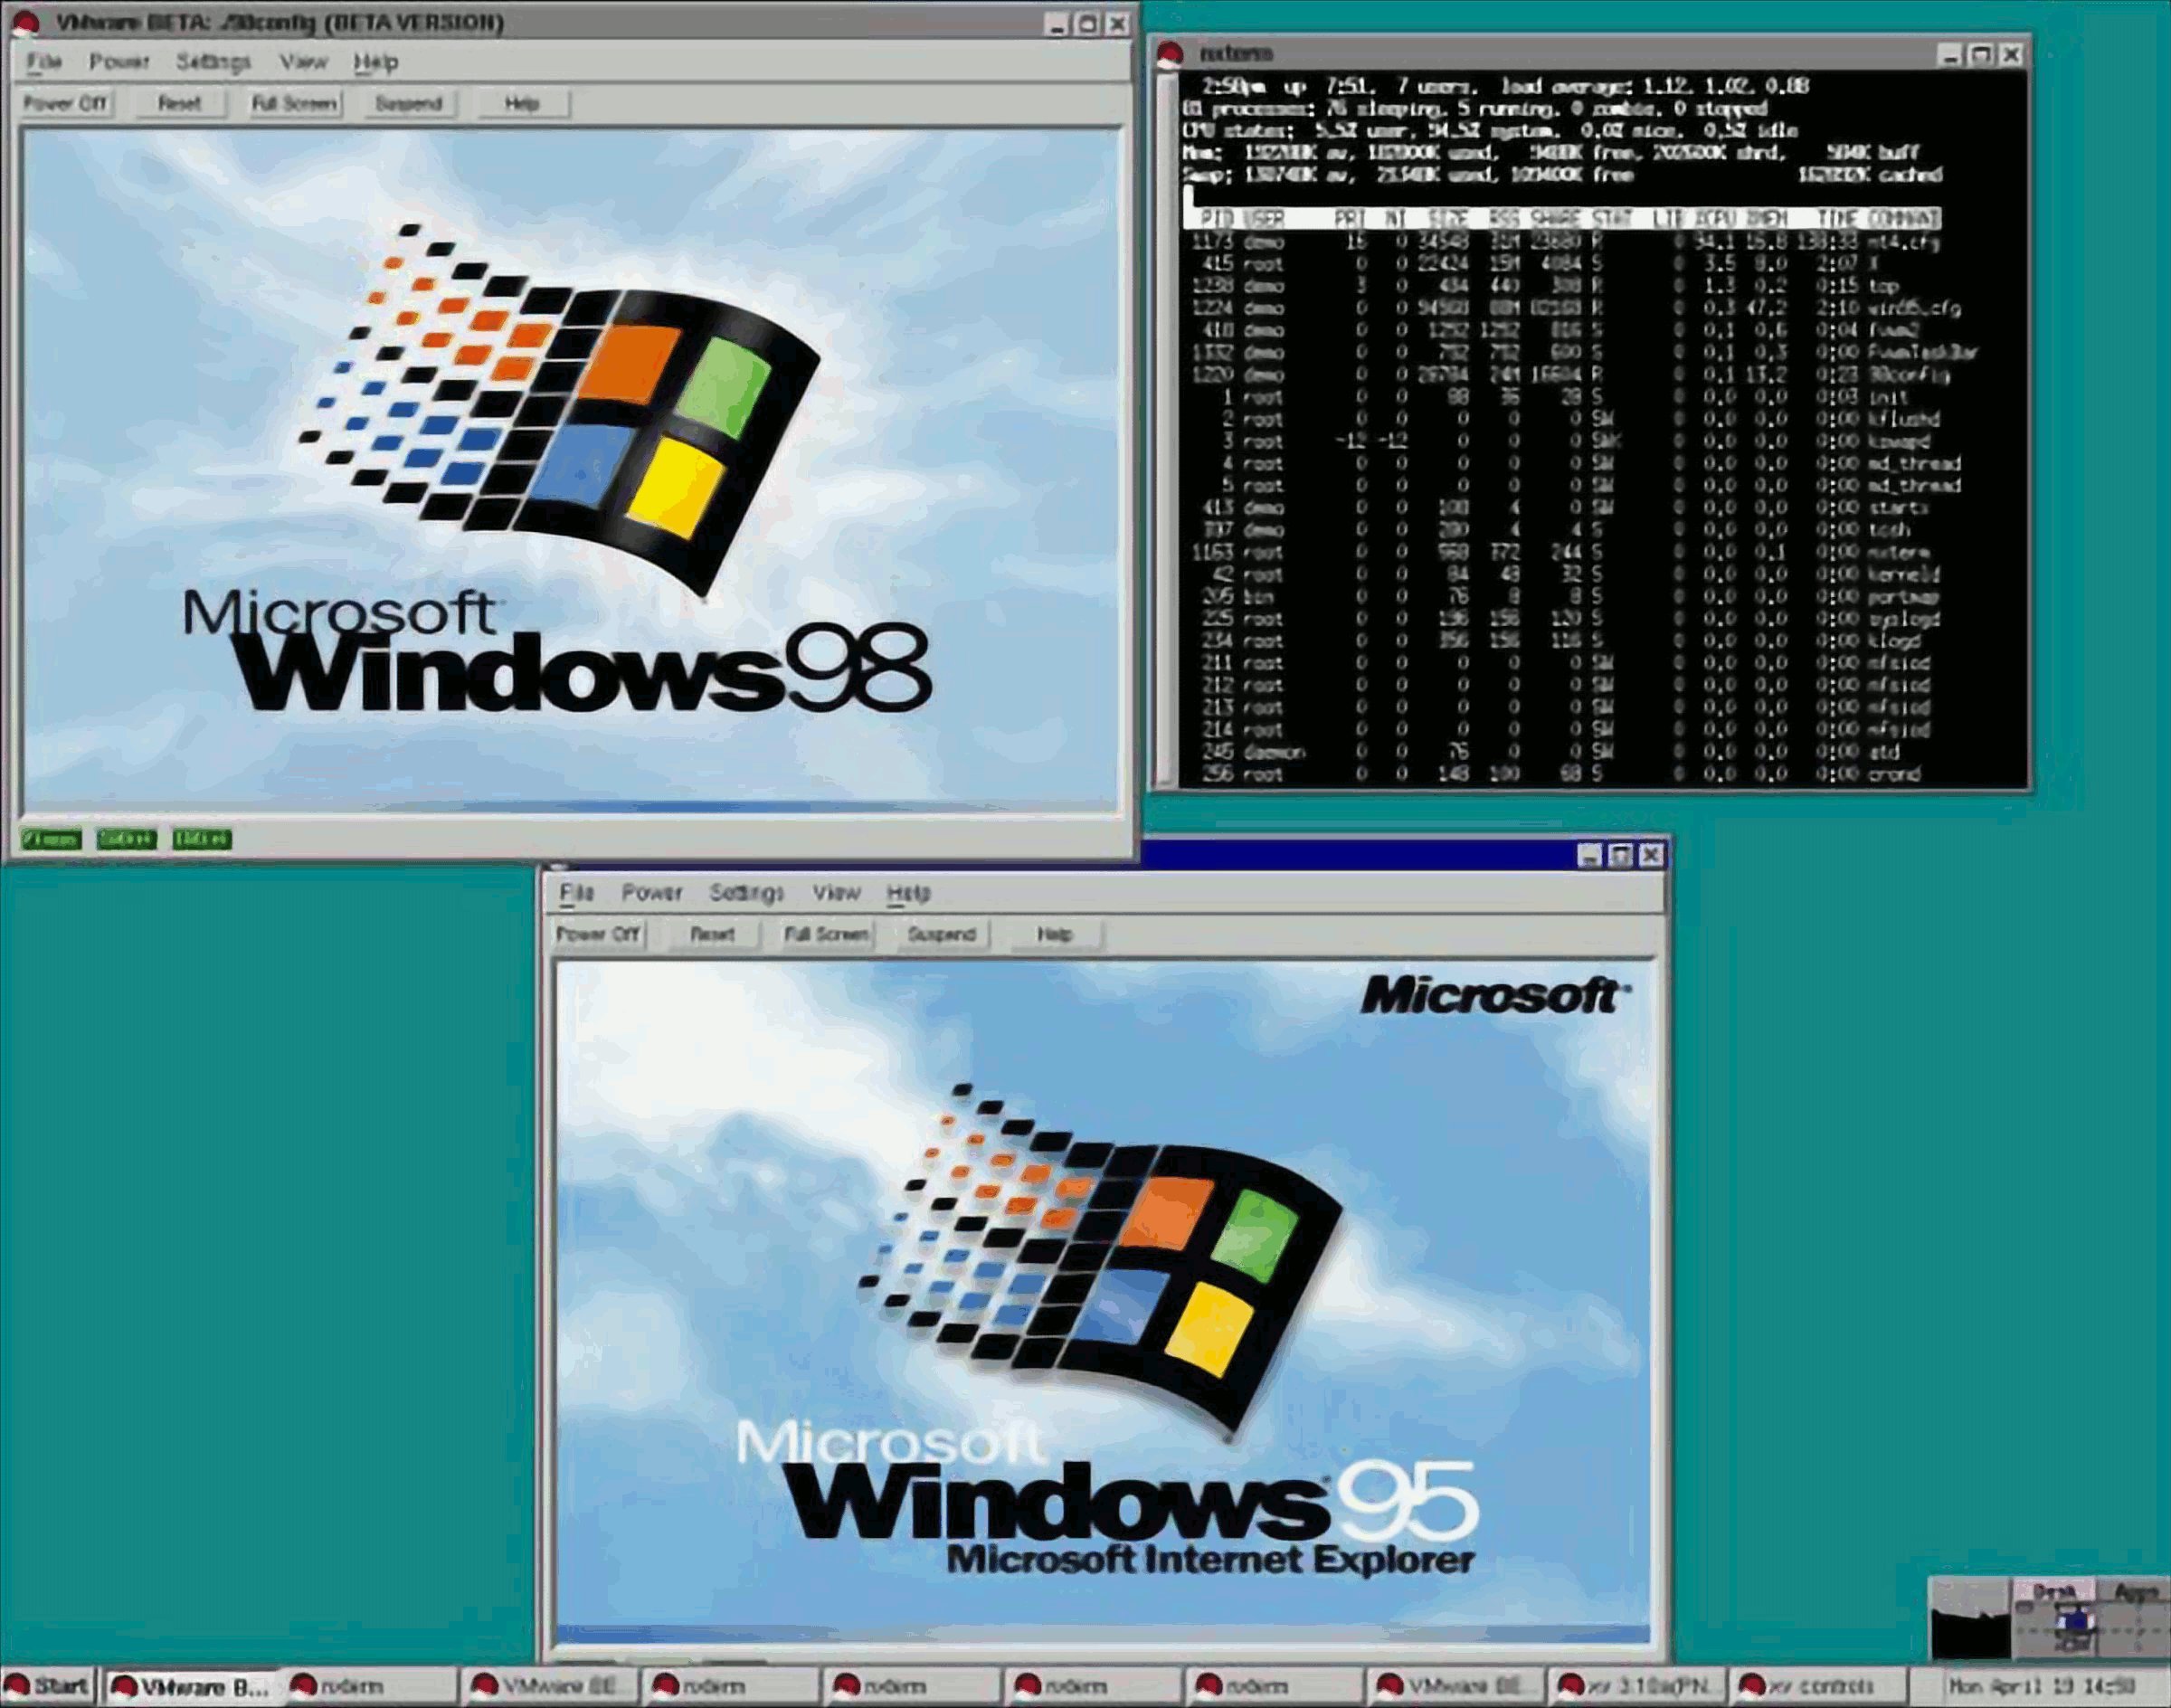 A Red Hat Linux desktop running VMWare Workstation, two virtual machines running Windows 95 and Windows 98, and a terminal window showing the output of the top command